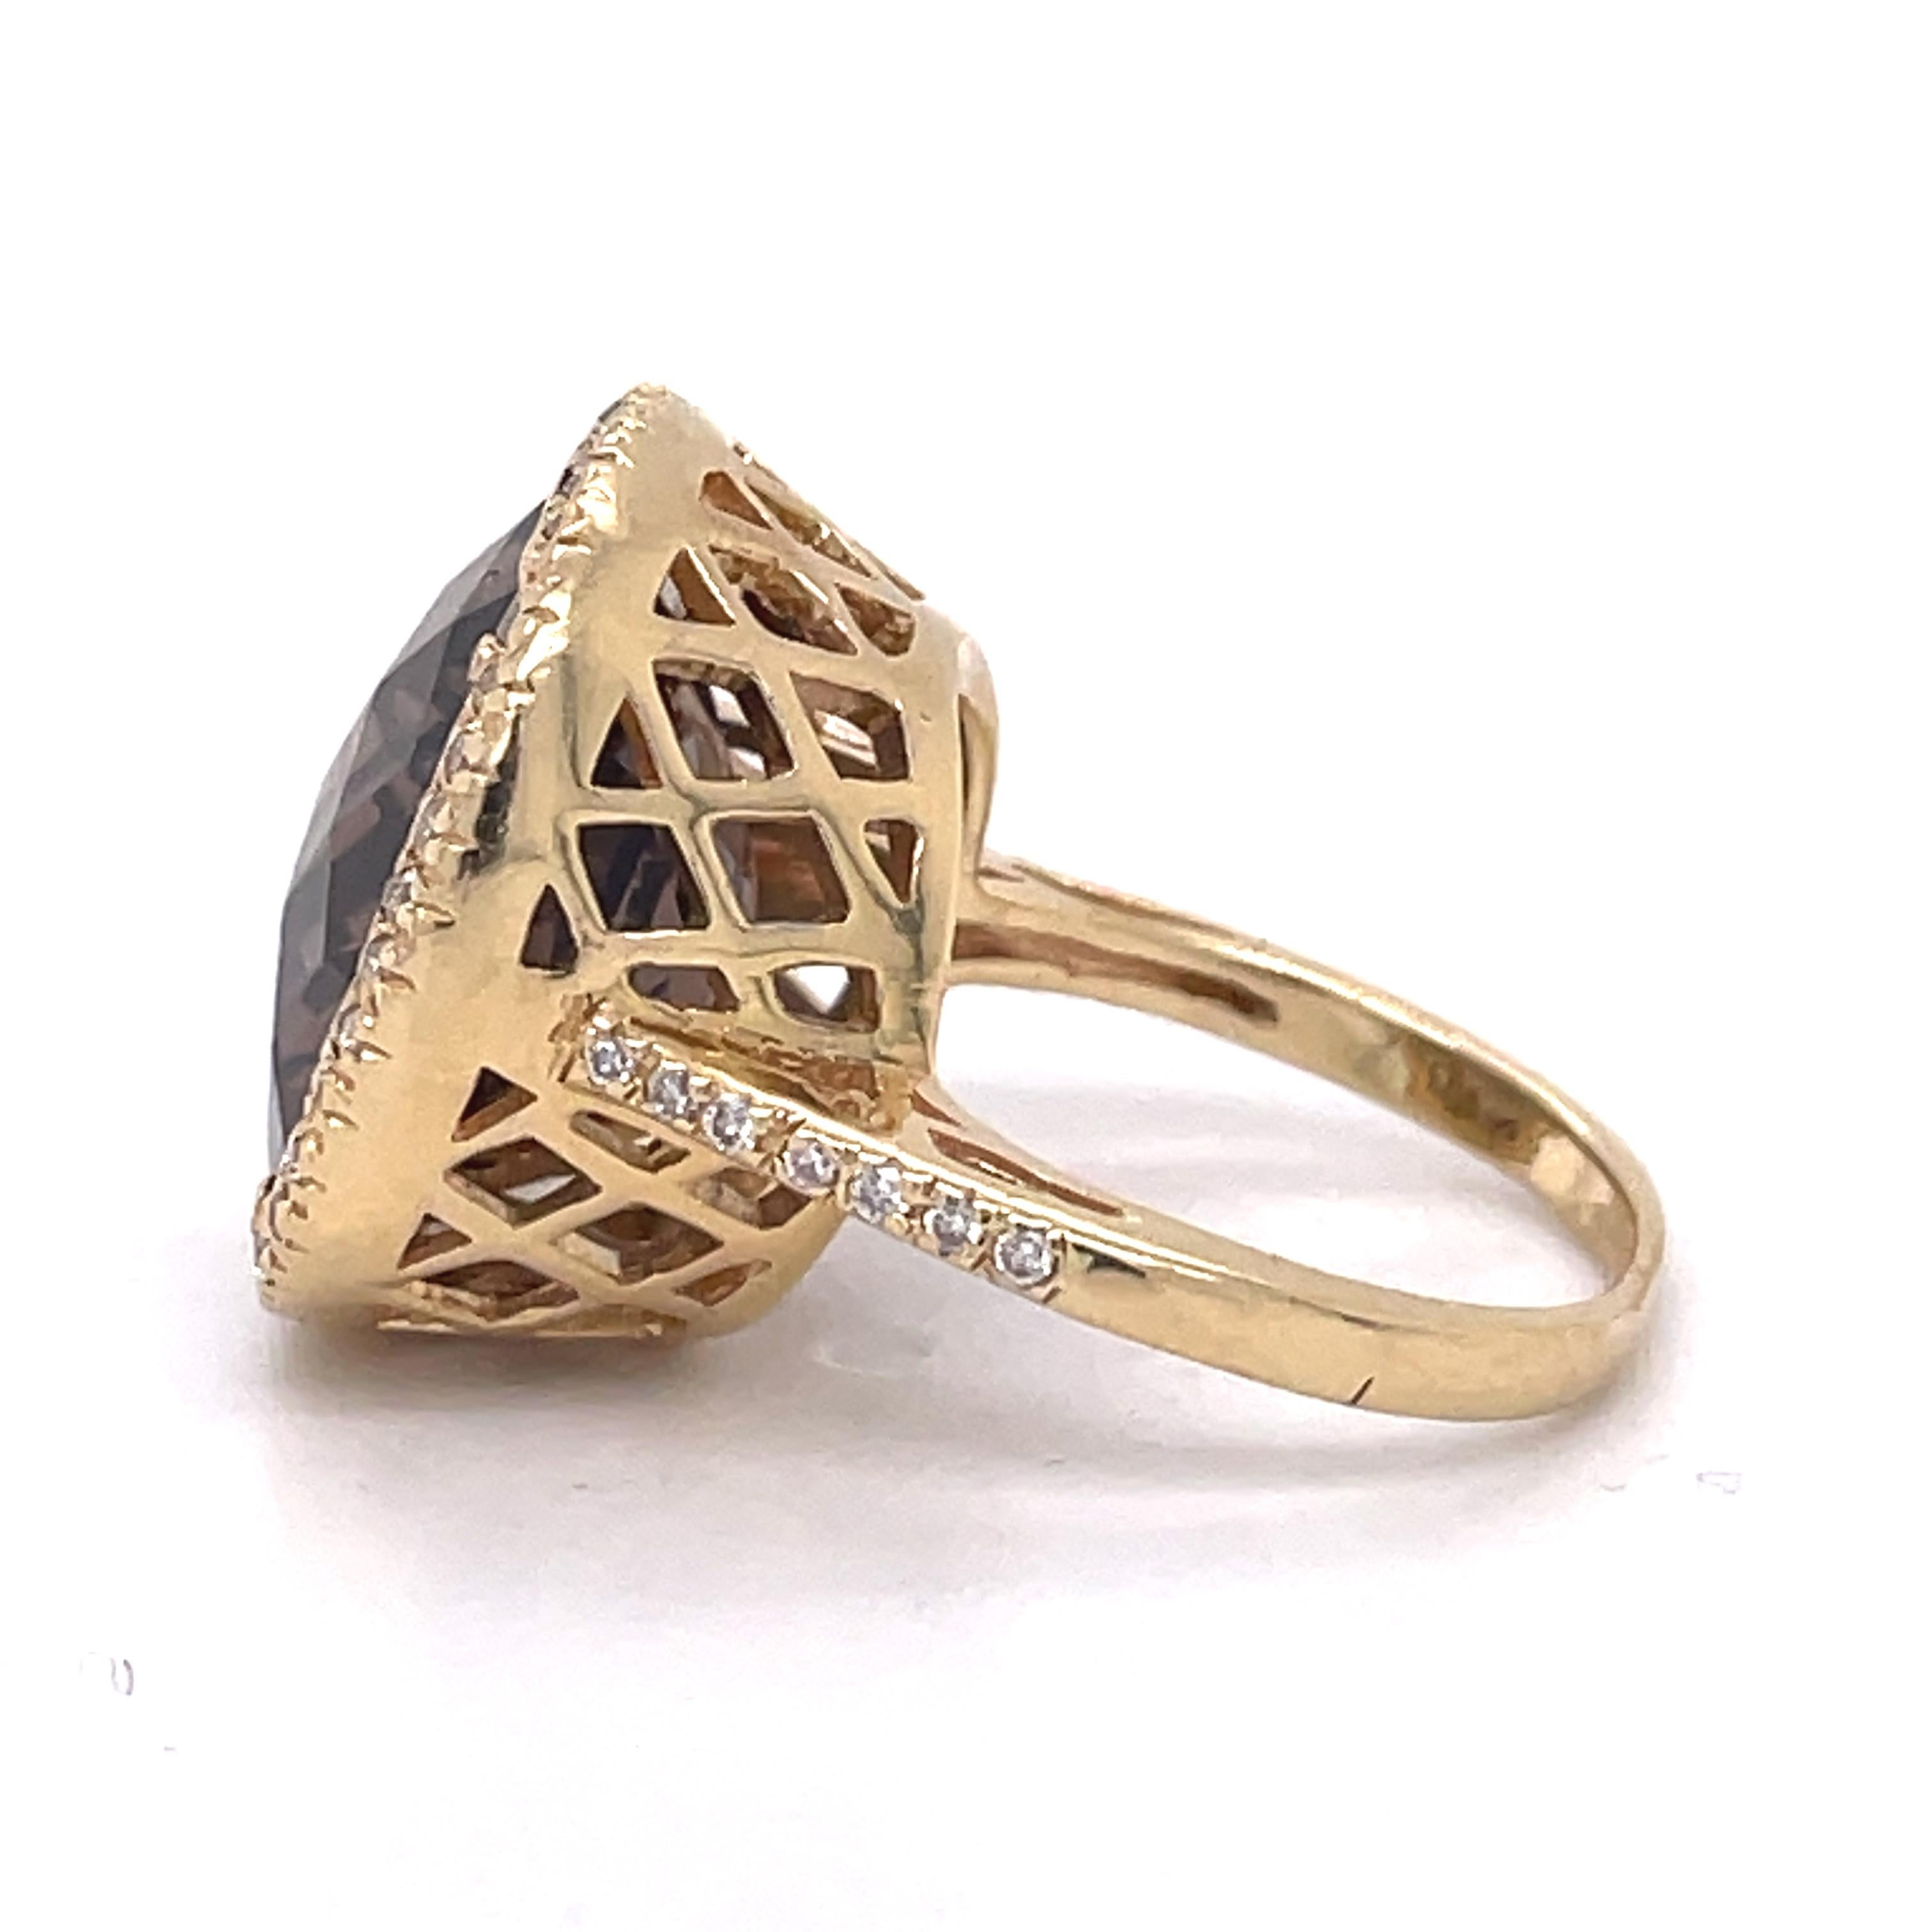 Jewelry Material: Yellow Gold 14k (the gold has been tested by a professional)
Total Carat Weight: 10.27ct (Approx.)
Total Metal Weight: 7.54g
Size: 5.5 US \ 16.30MM (inner diameter)

Grading Results:
Stone Type:  Topaz
Shape: Cushion
Carat: 10ct